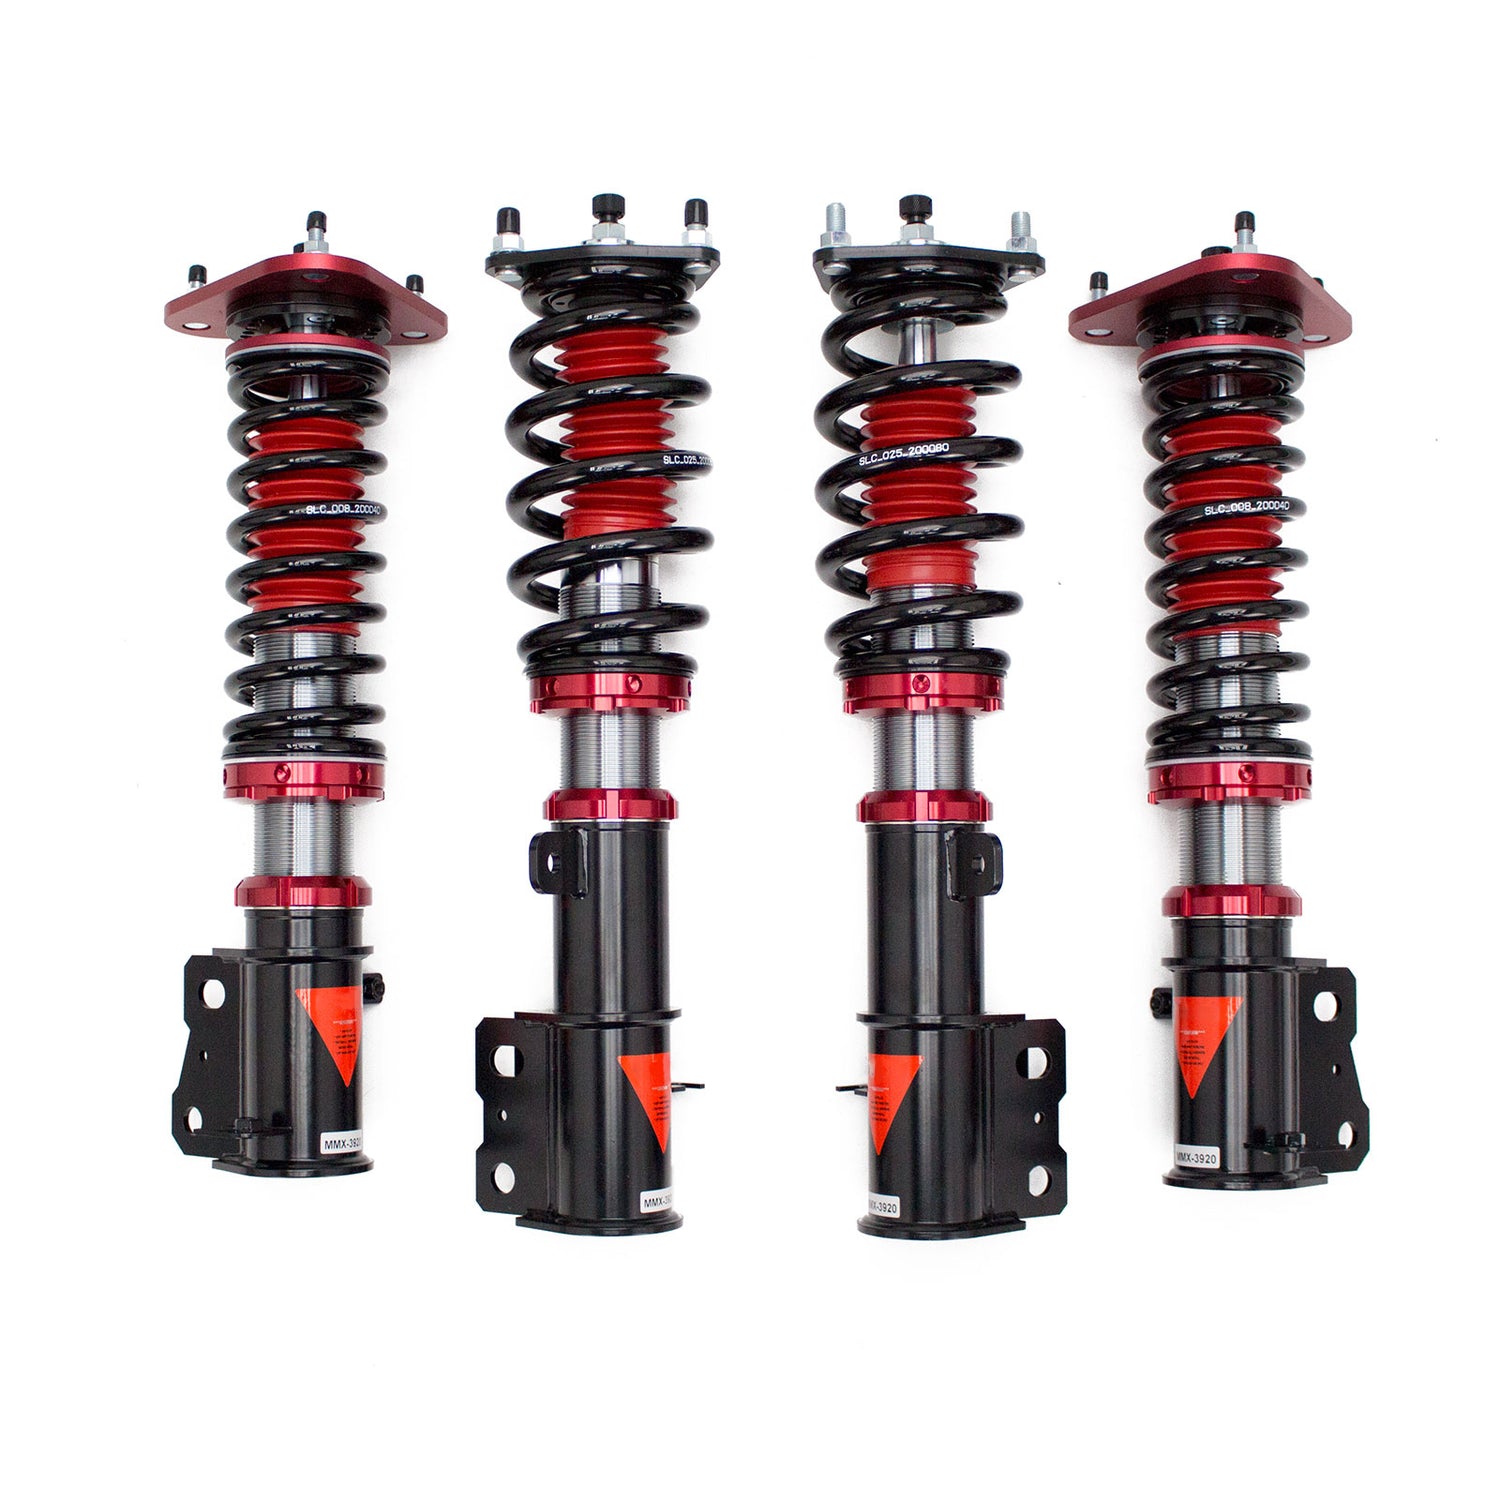 MMX3920 MAXX Coilovers Lowering Kit, Fully Adjustable, Ride Height, 40 Clicks Rebound Settings